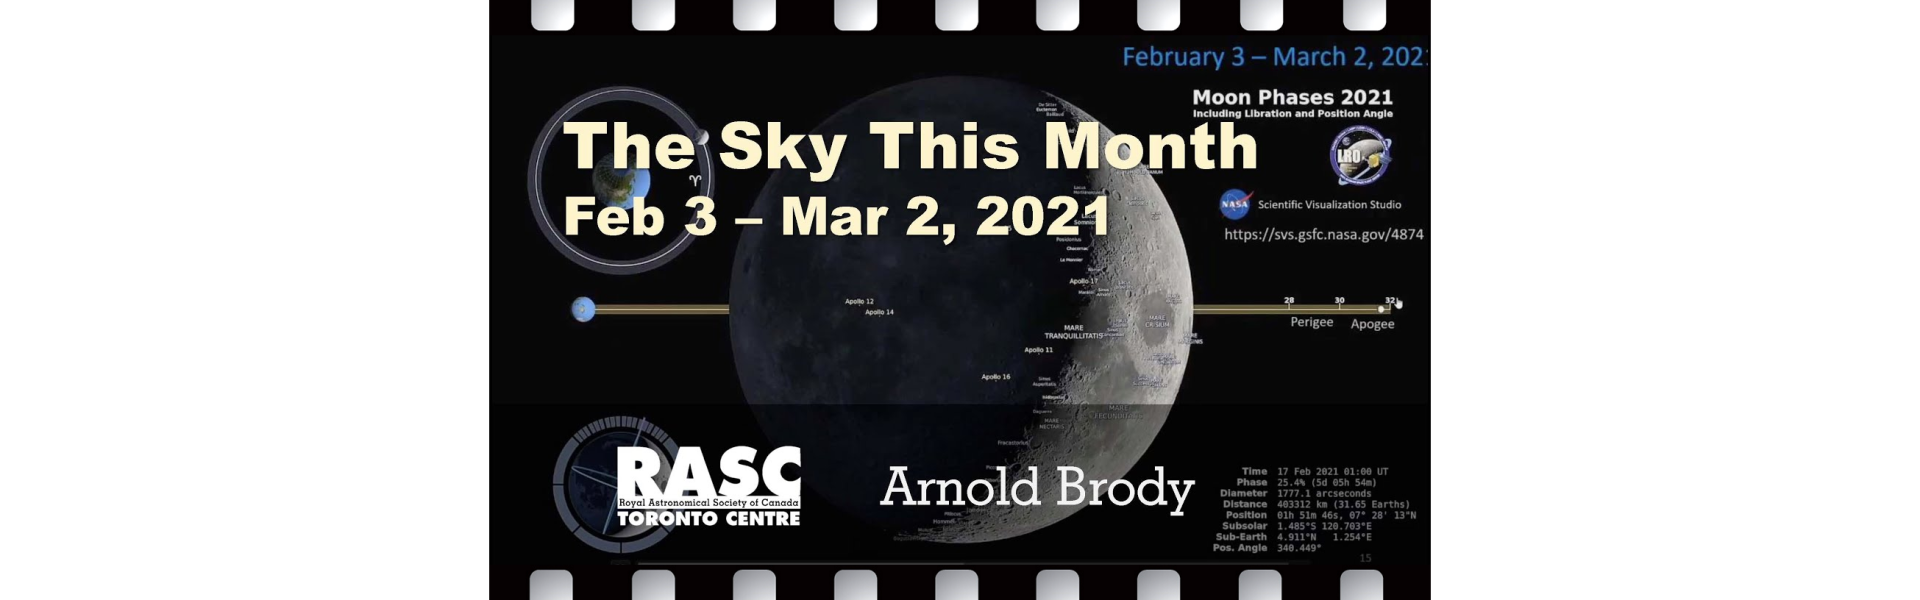 The Sky This Month for Feb 3 - Mar 2, 2021